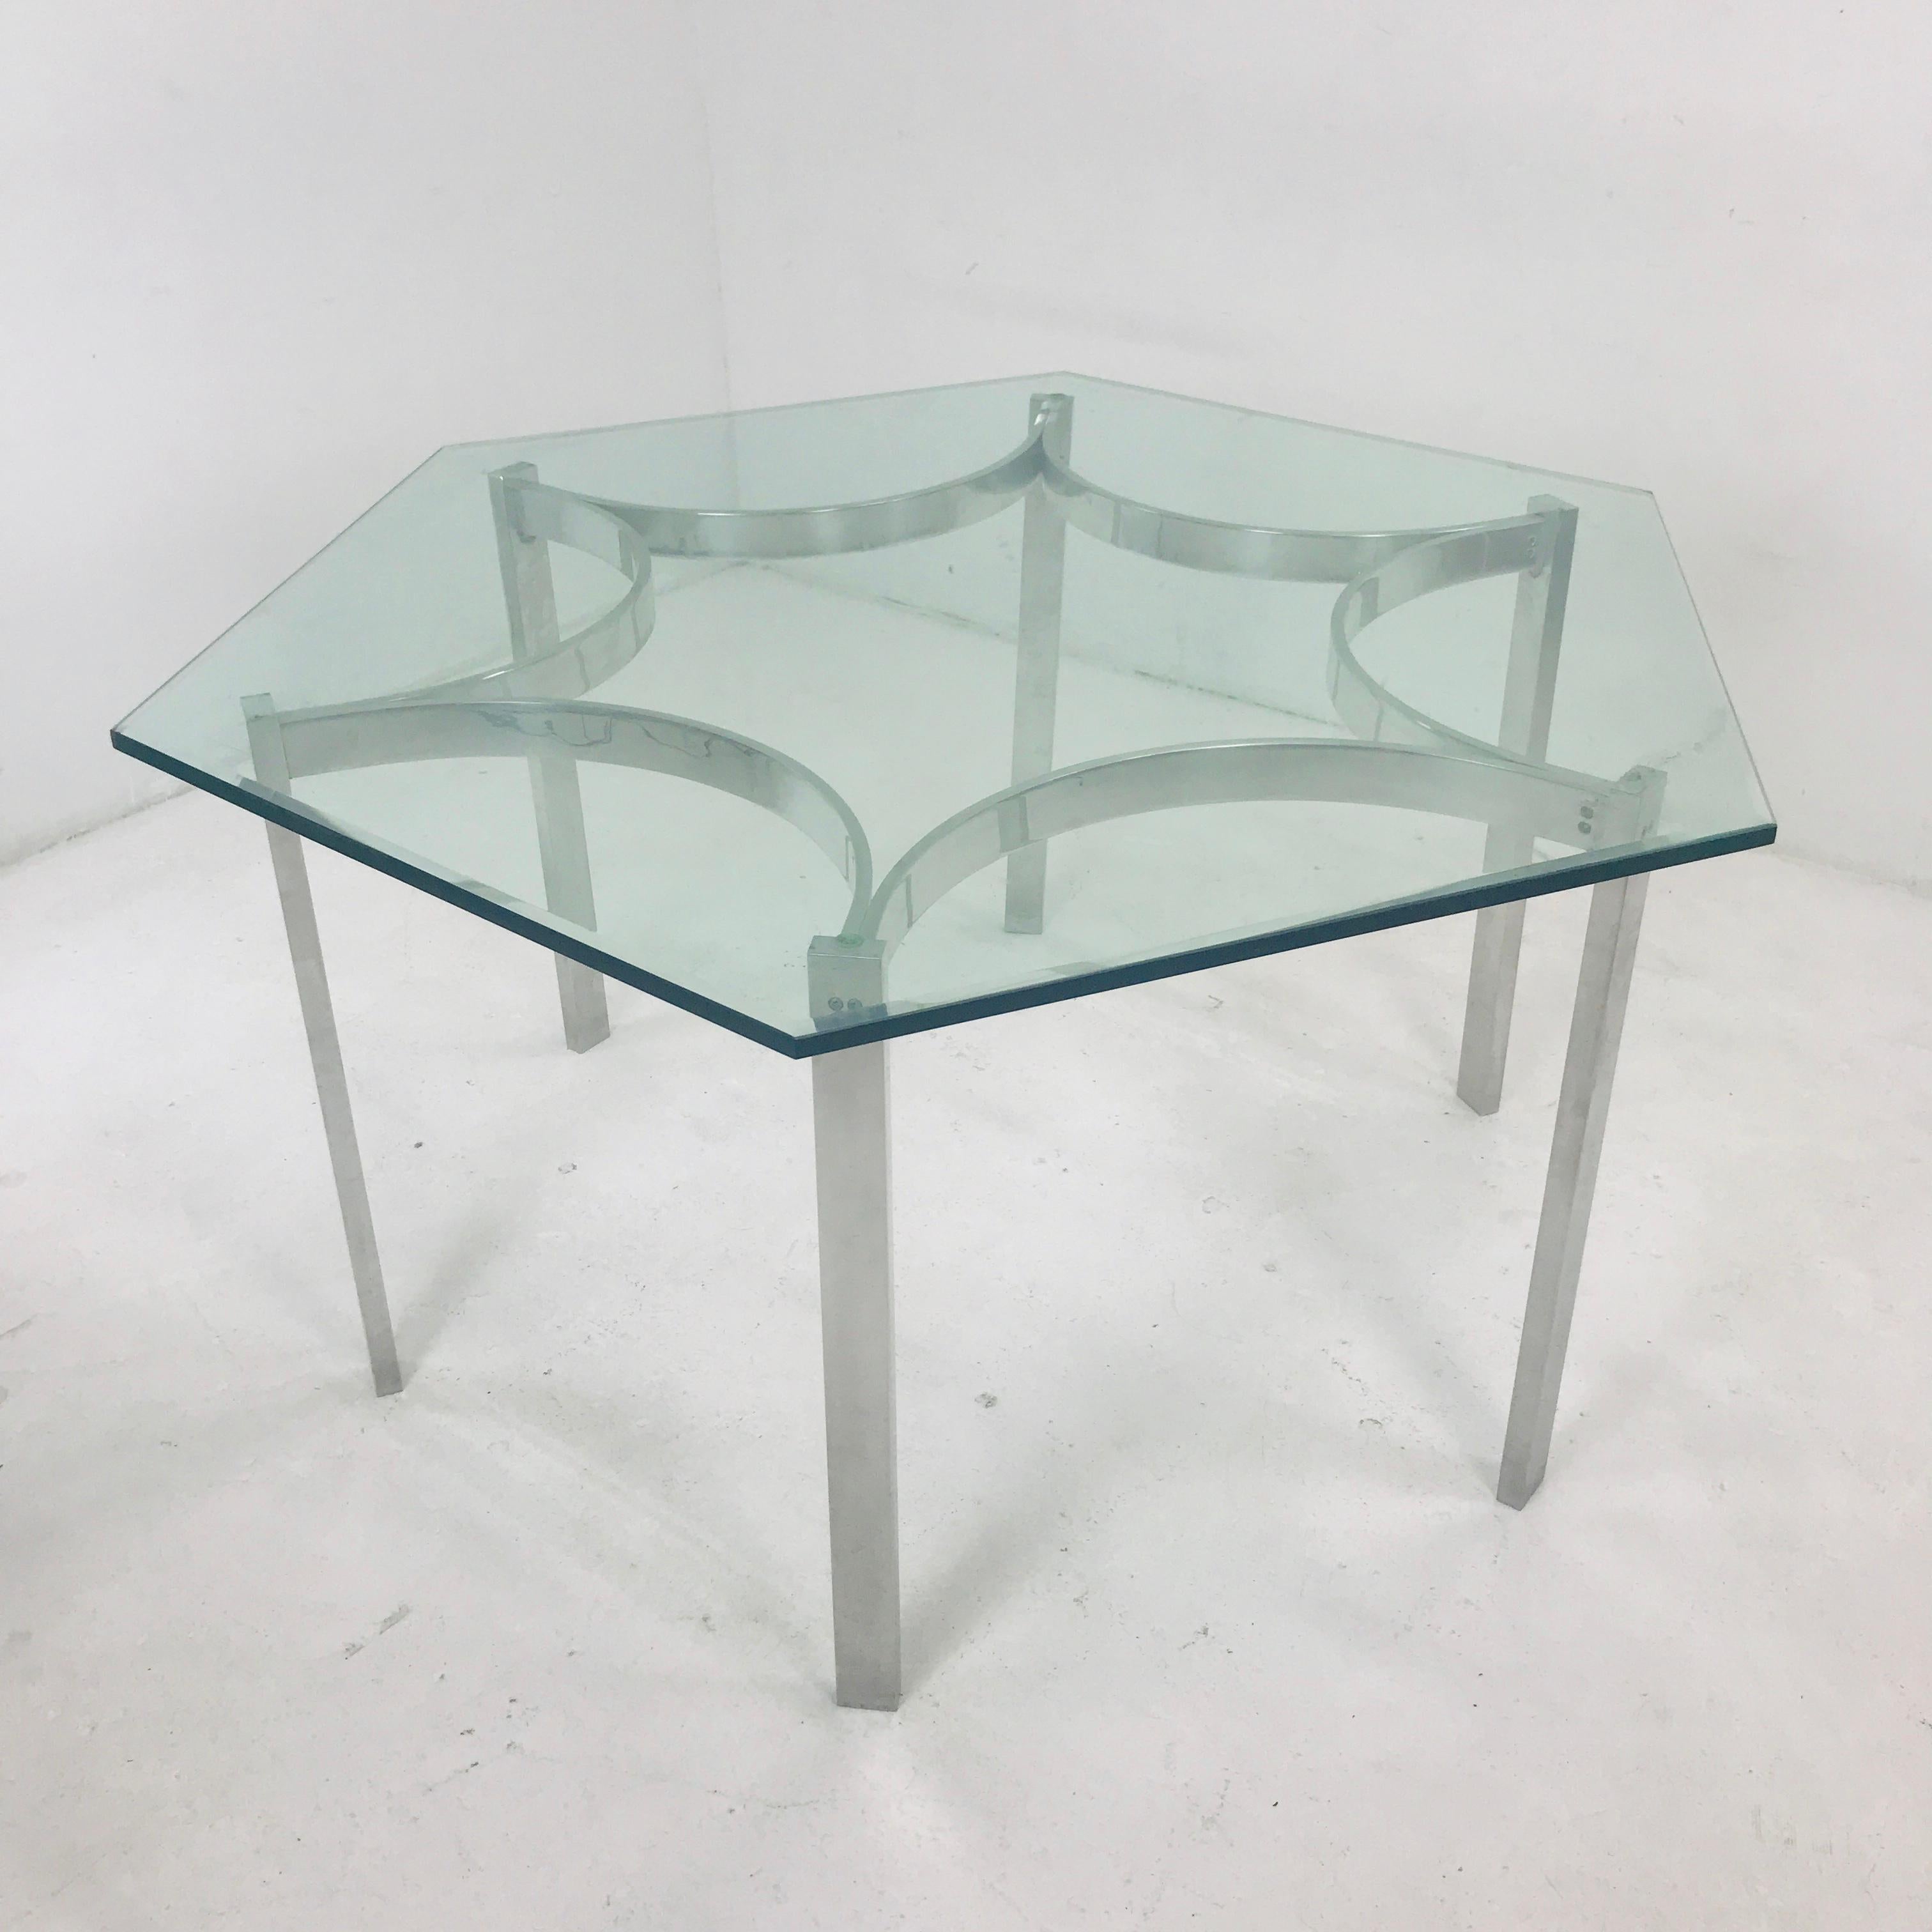 Mid-Century Modern aluminum dining table with glass top. Glass can be changed to allow for more chairs.